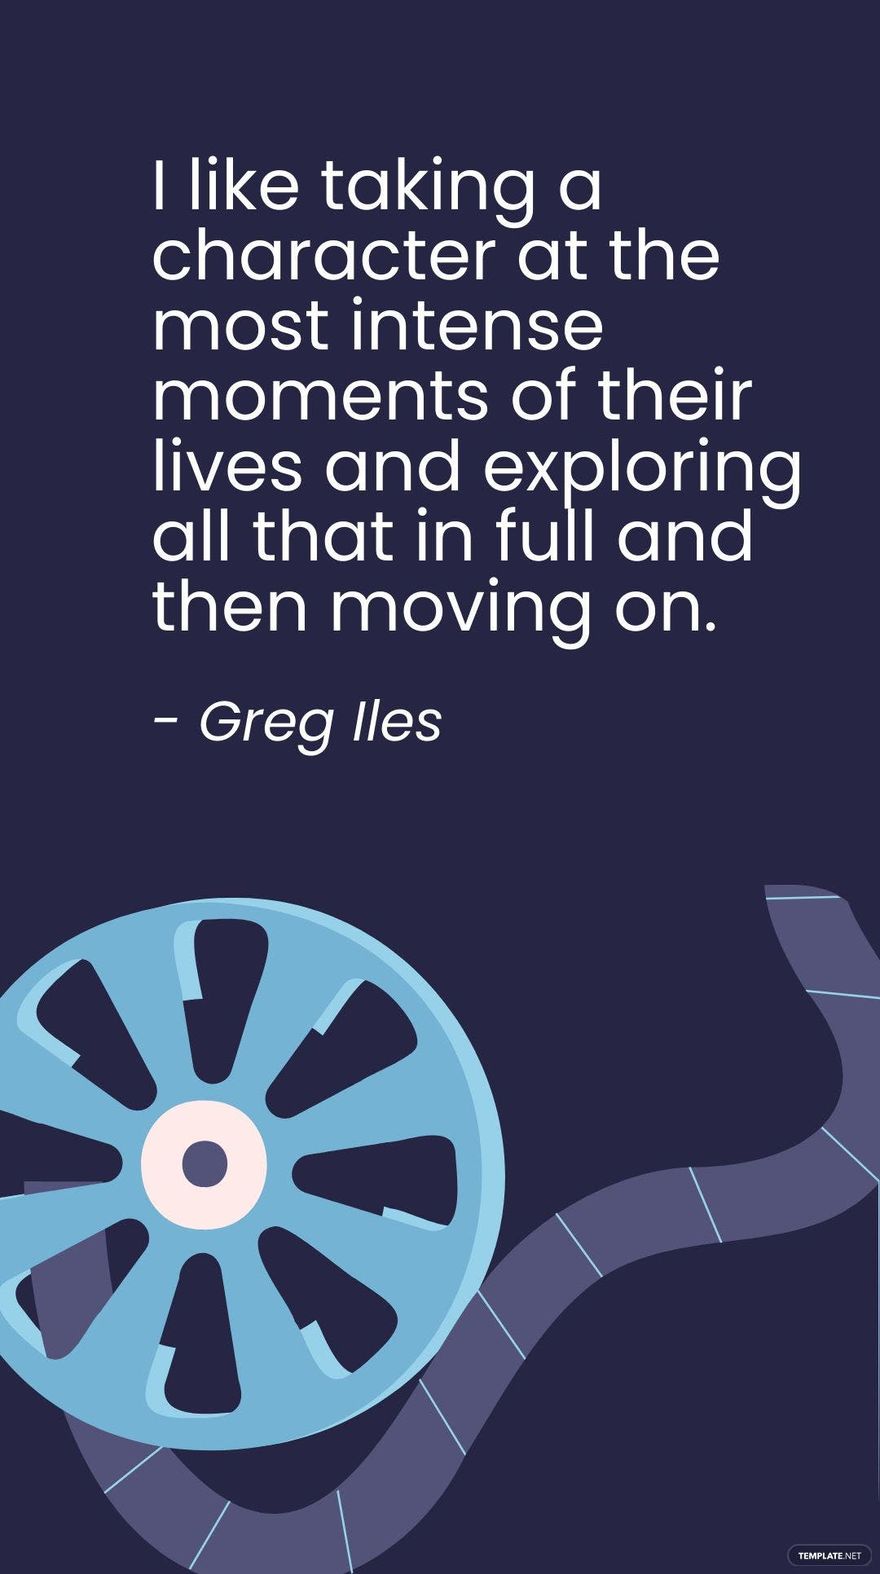 Greg Iles - I like taking a character at the most intense moments of their lives and exploring all that in full and then moving on.